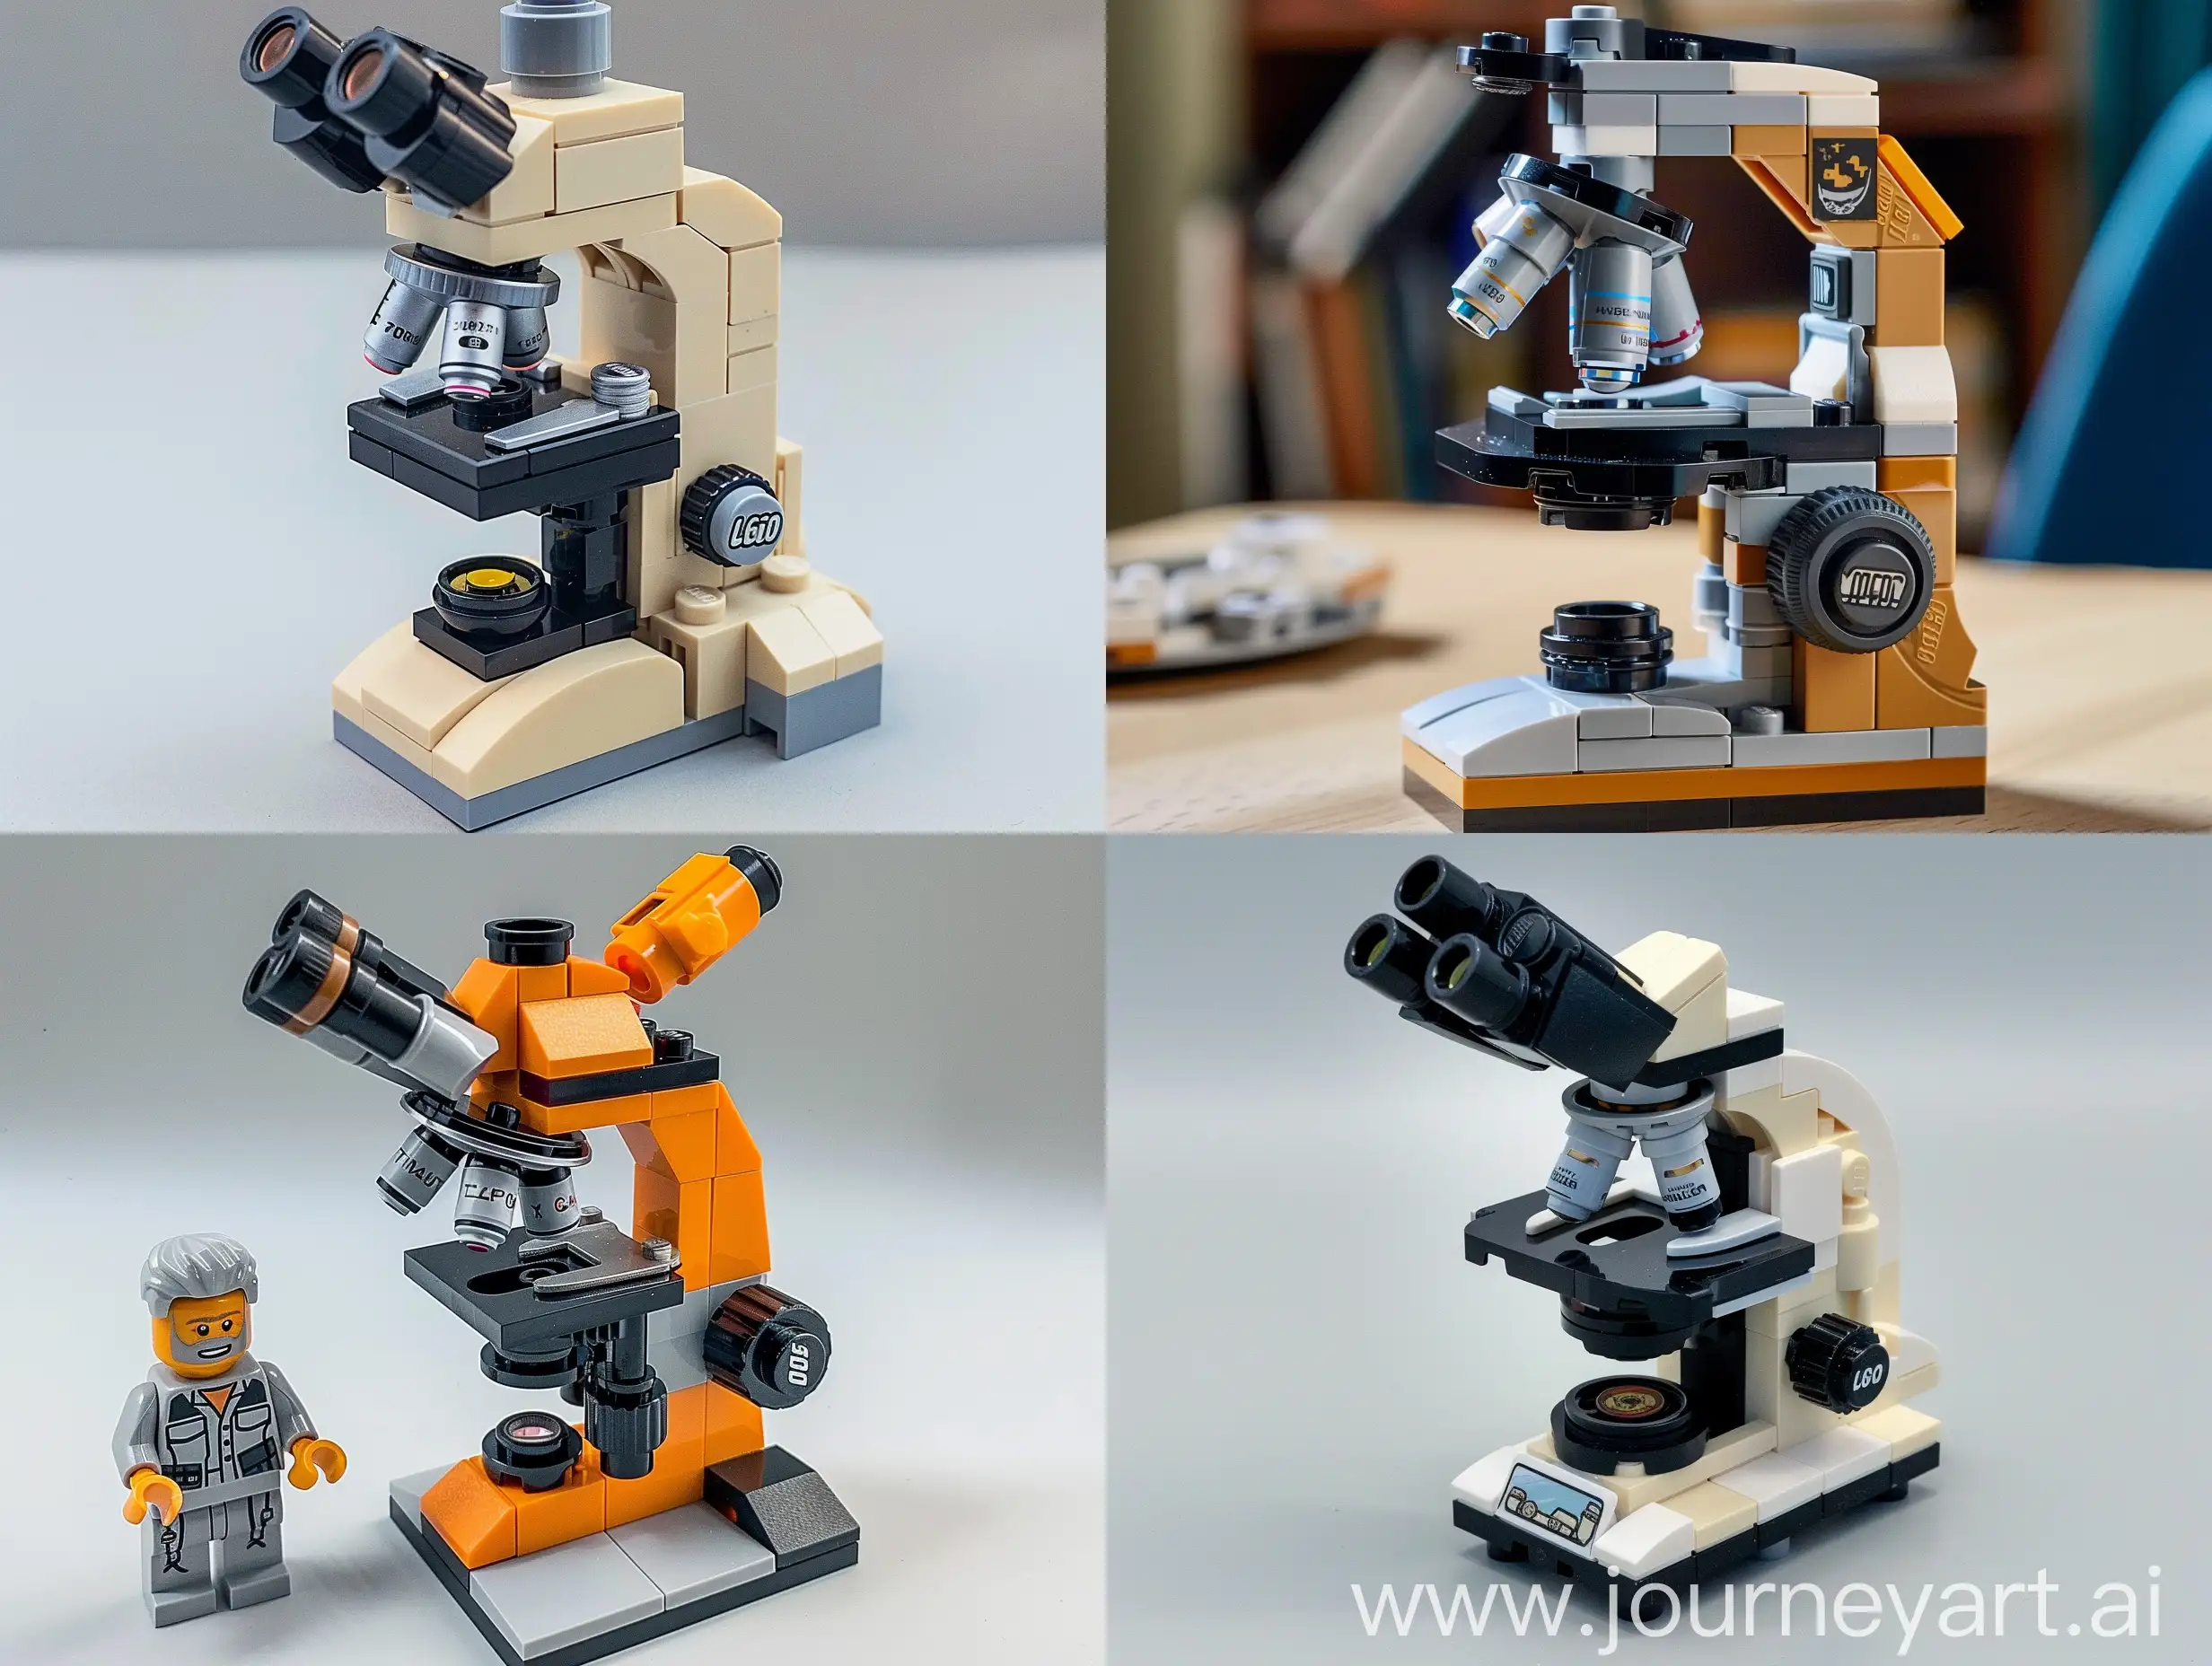 LEGO-Microscope-Set-Educational-Toy-for-Aspiring-Scientists